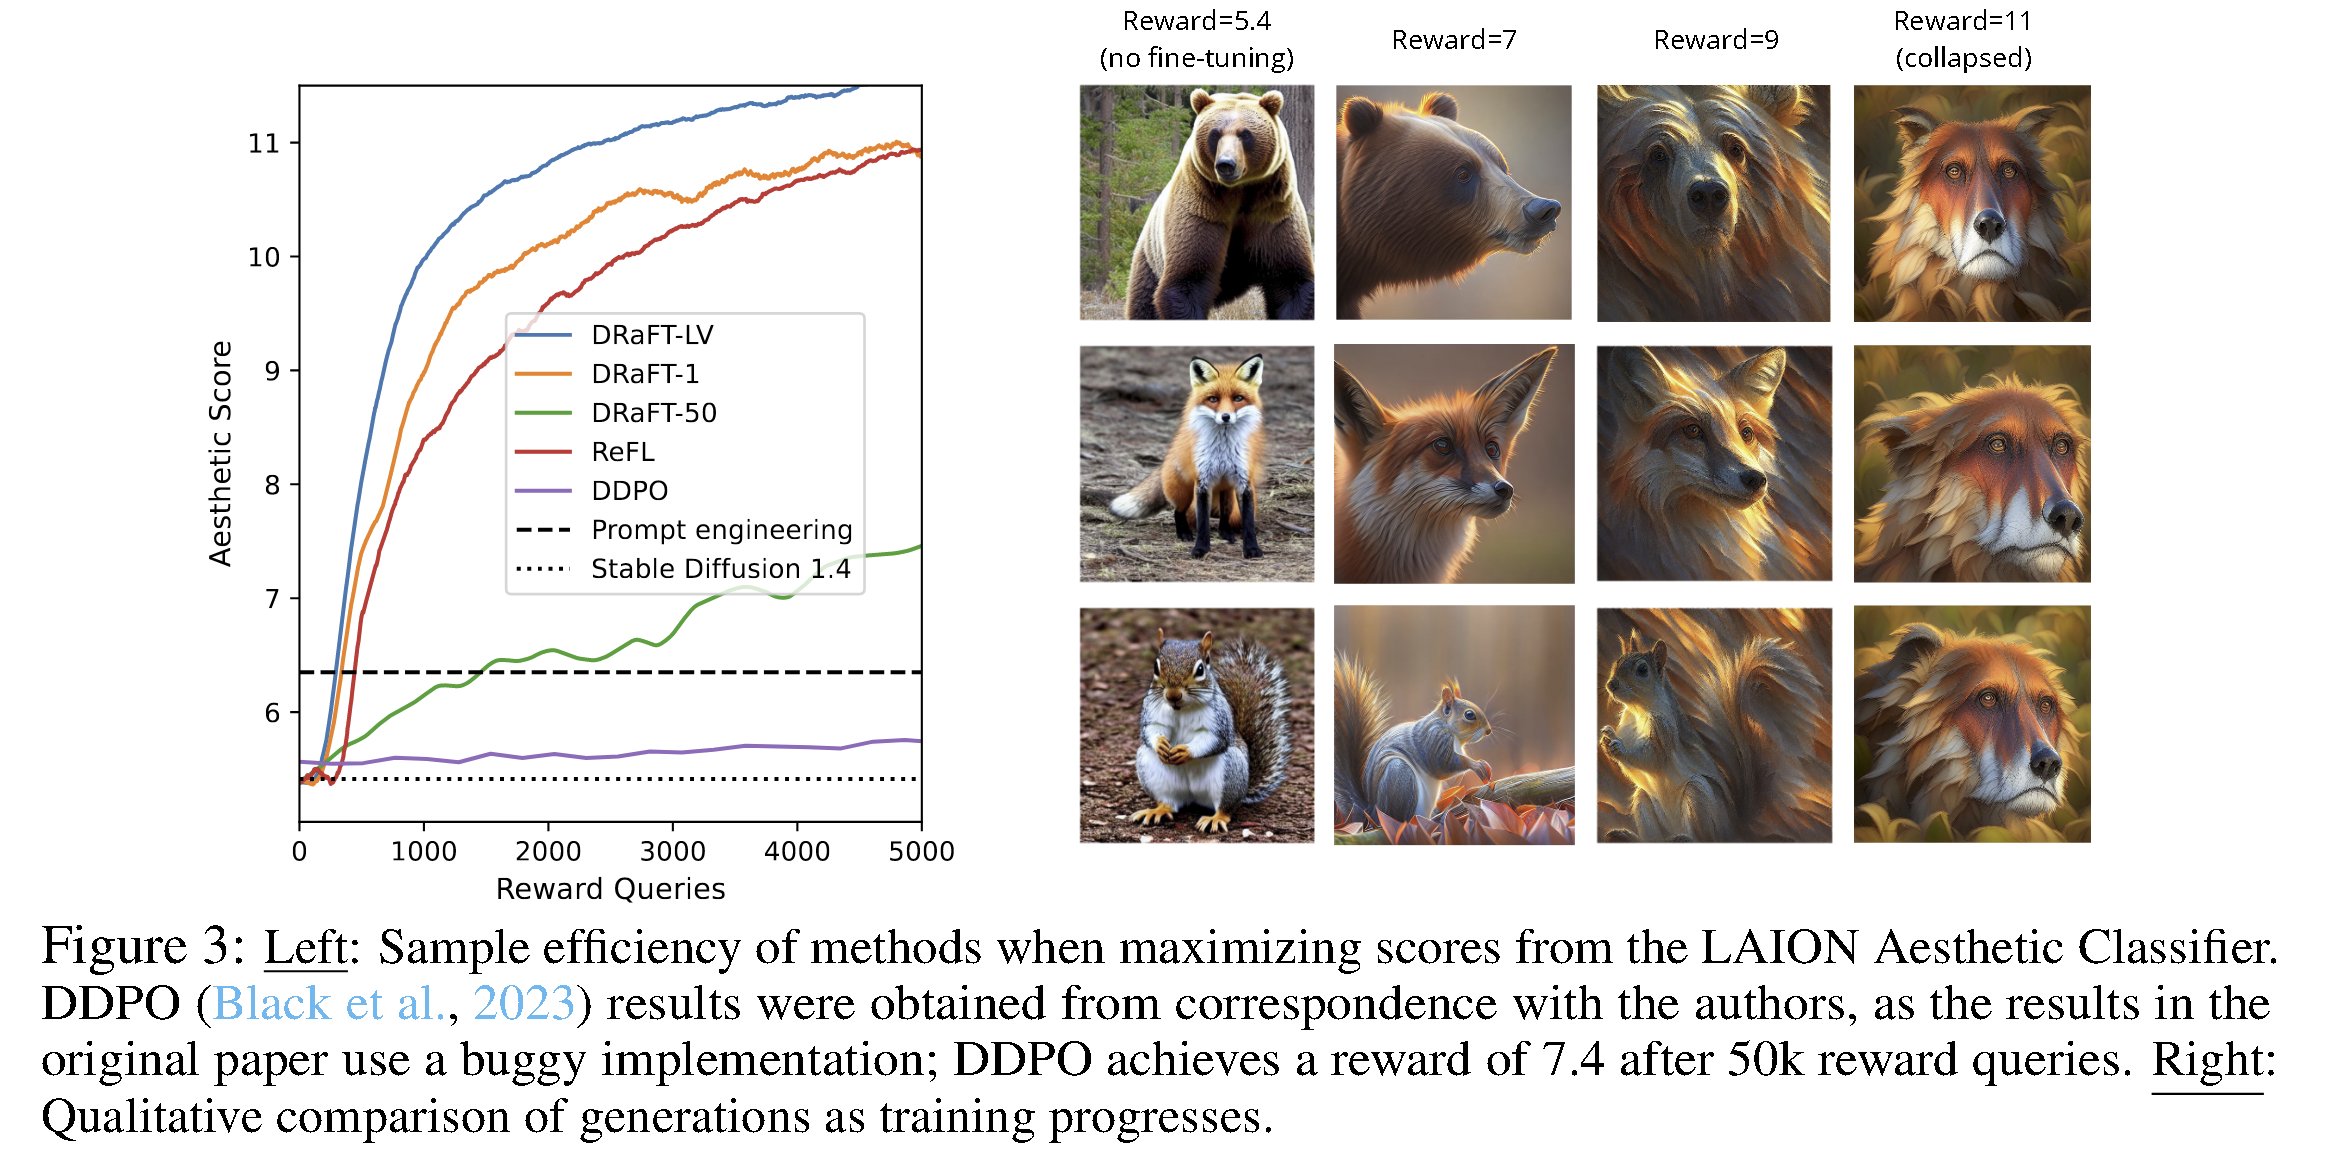 Google DeepMind Introduces Direct Reward Fine-Tuning (DRaFT): An Effective Artificial Intelligence Method for Fine-Tuning Diffusion Models to Maximize Differentiable Reward Functions